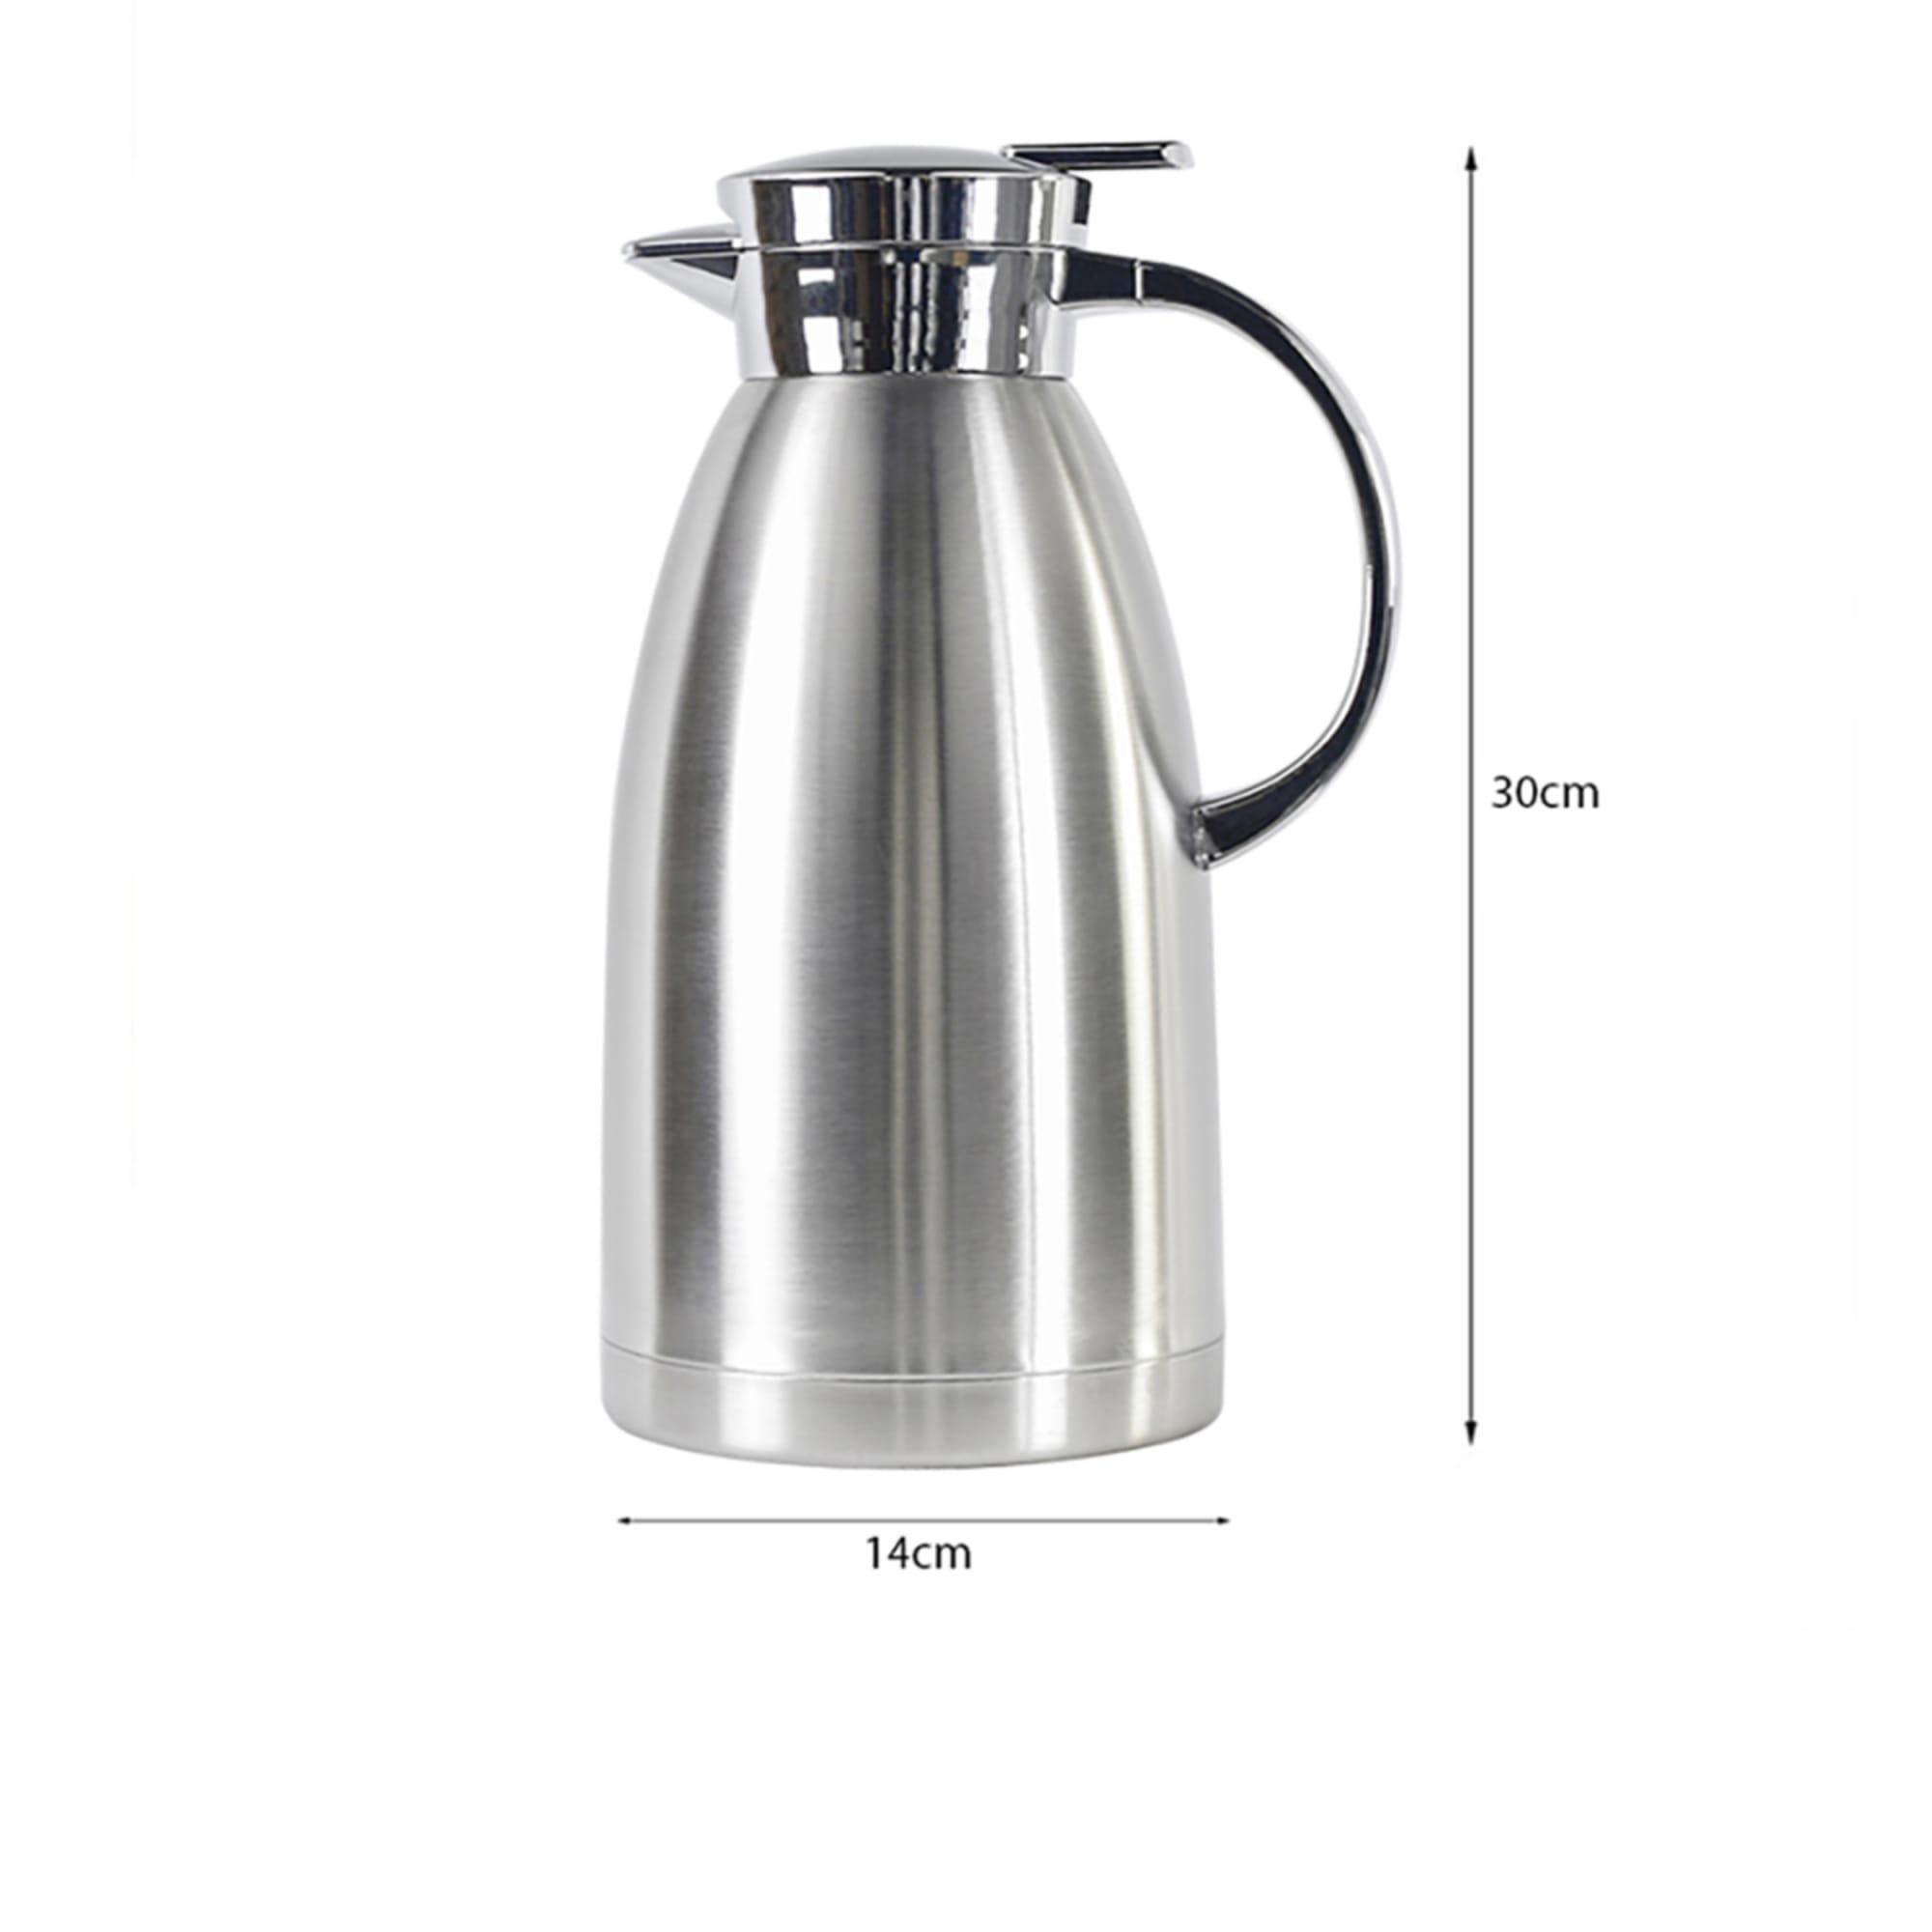 Soga Stainless Steel Insulated Kettle 2.3L Silver Image 7